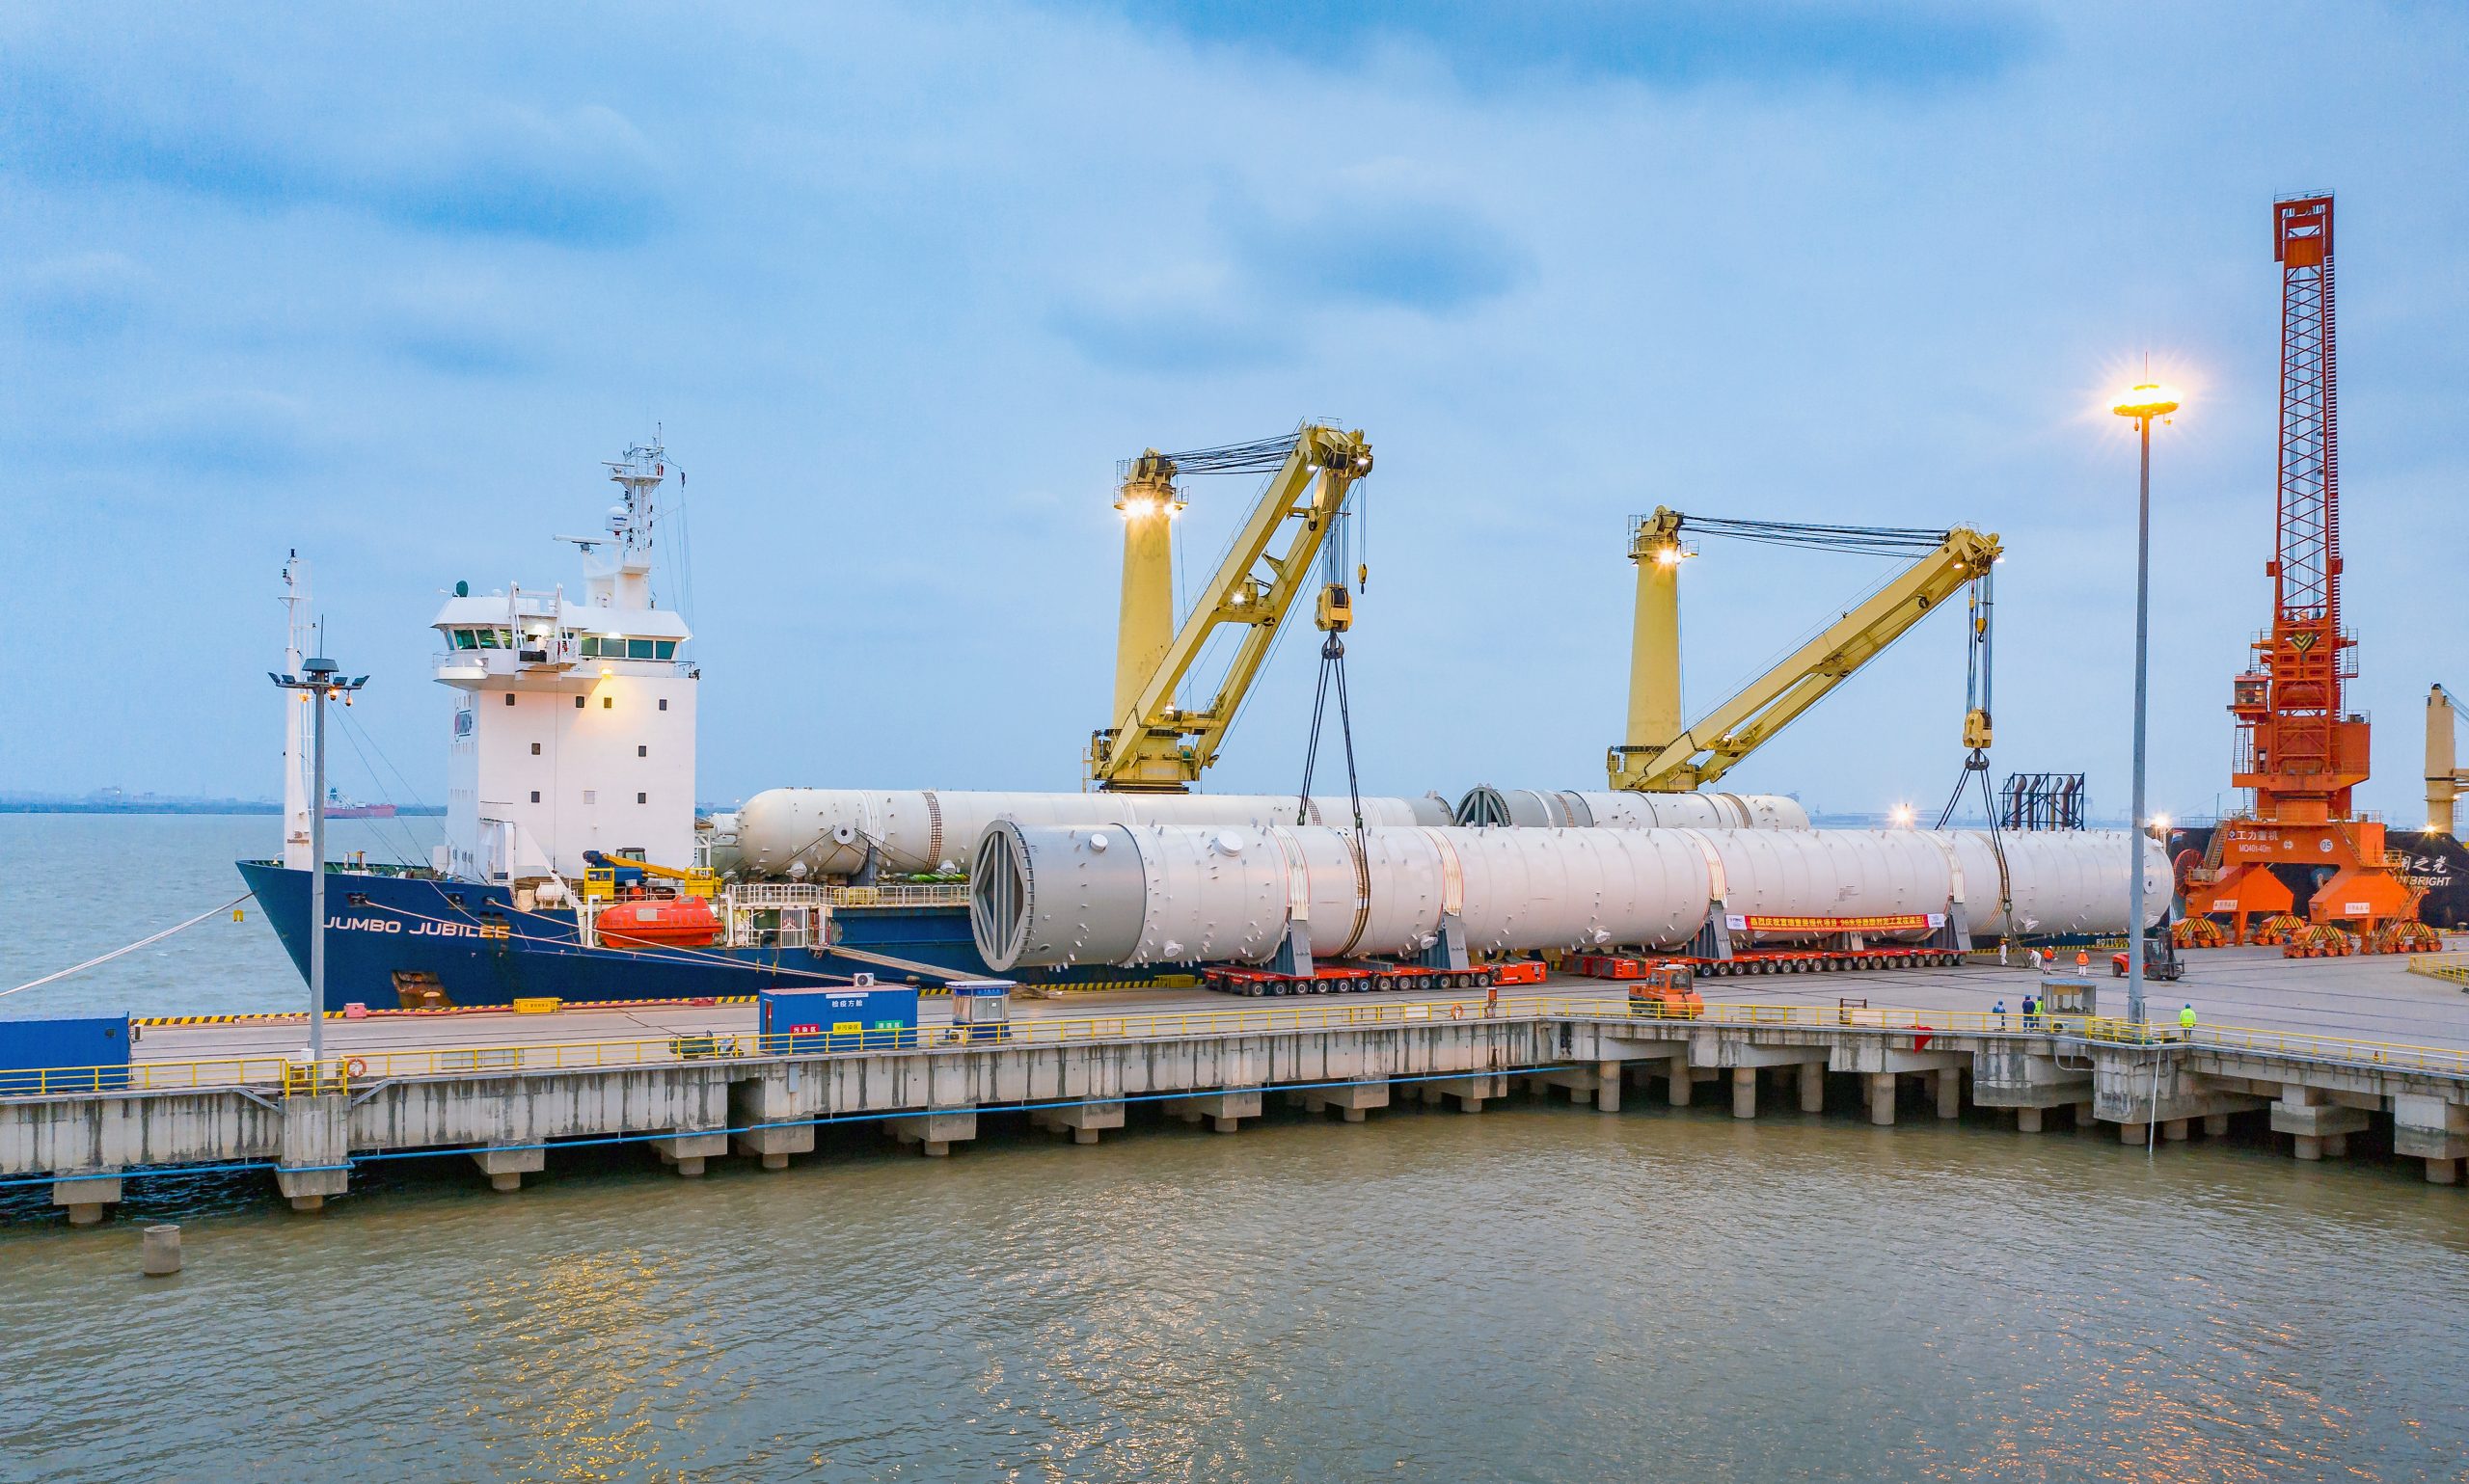 deugro delivers 120,000 frt of petrochemical equipment for EGAT project